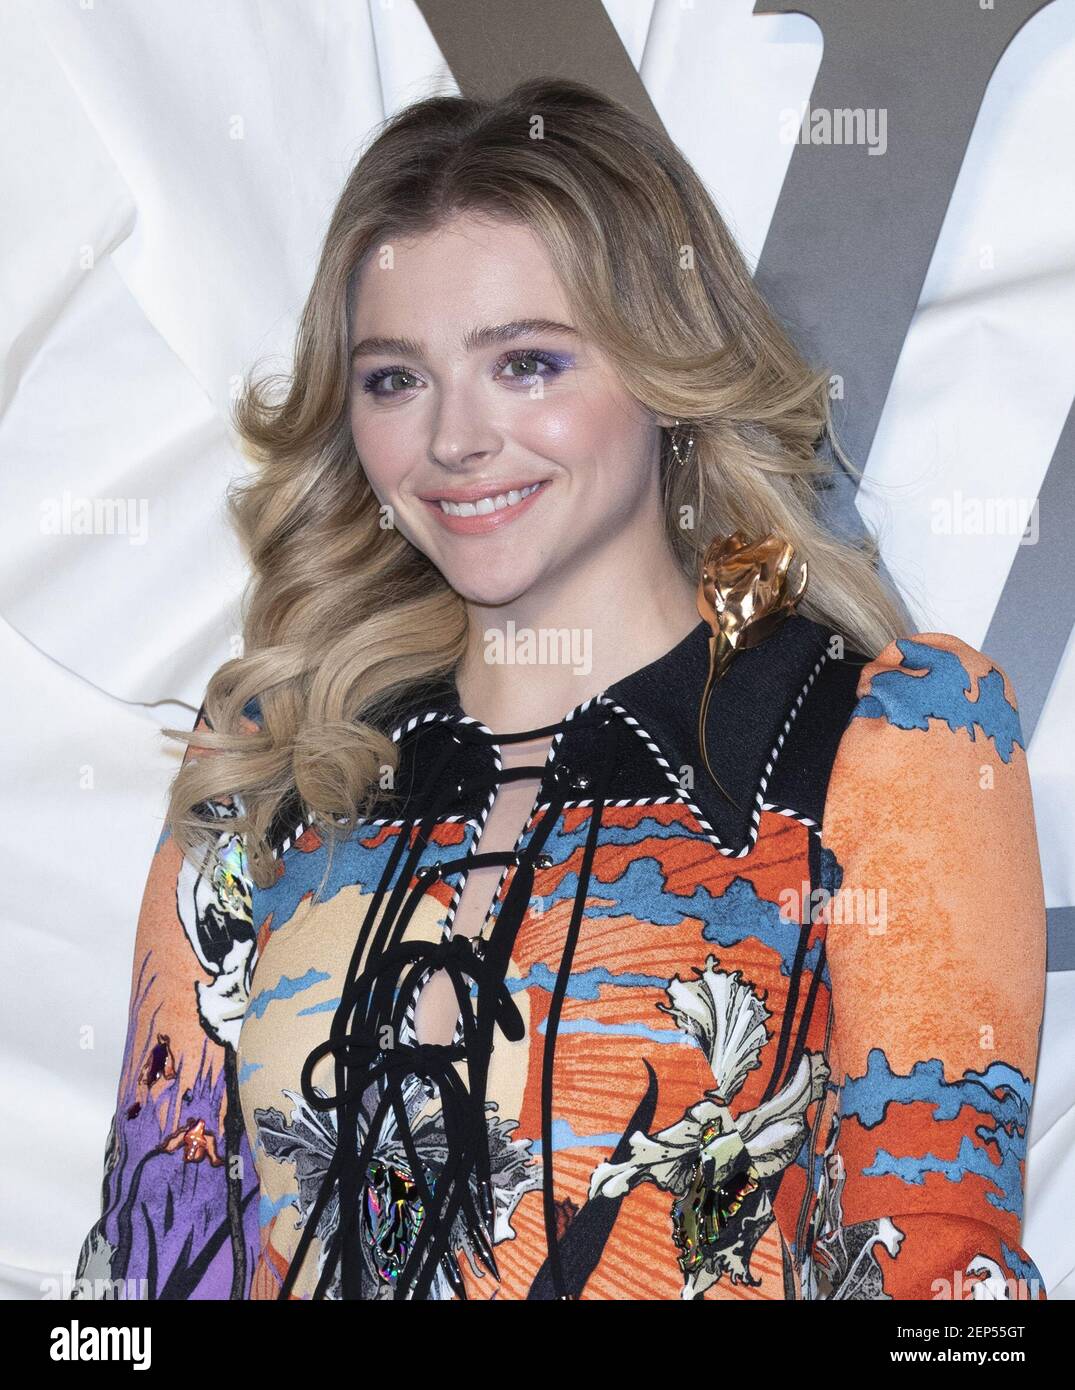 American actress Chloe Moretz, attends a photo call for the Louis Vuitton  launching at Louis Vuitton Seoul in Seoul, South Korea on October 30, 2019.  (Photo by: Lee Young-ho/Sipa USA Stock Photo 